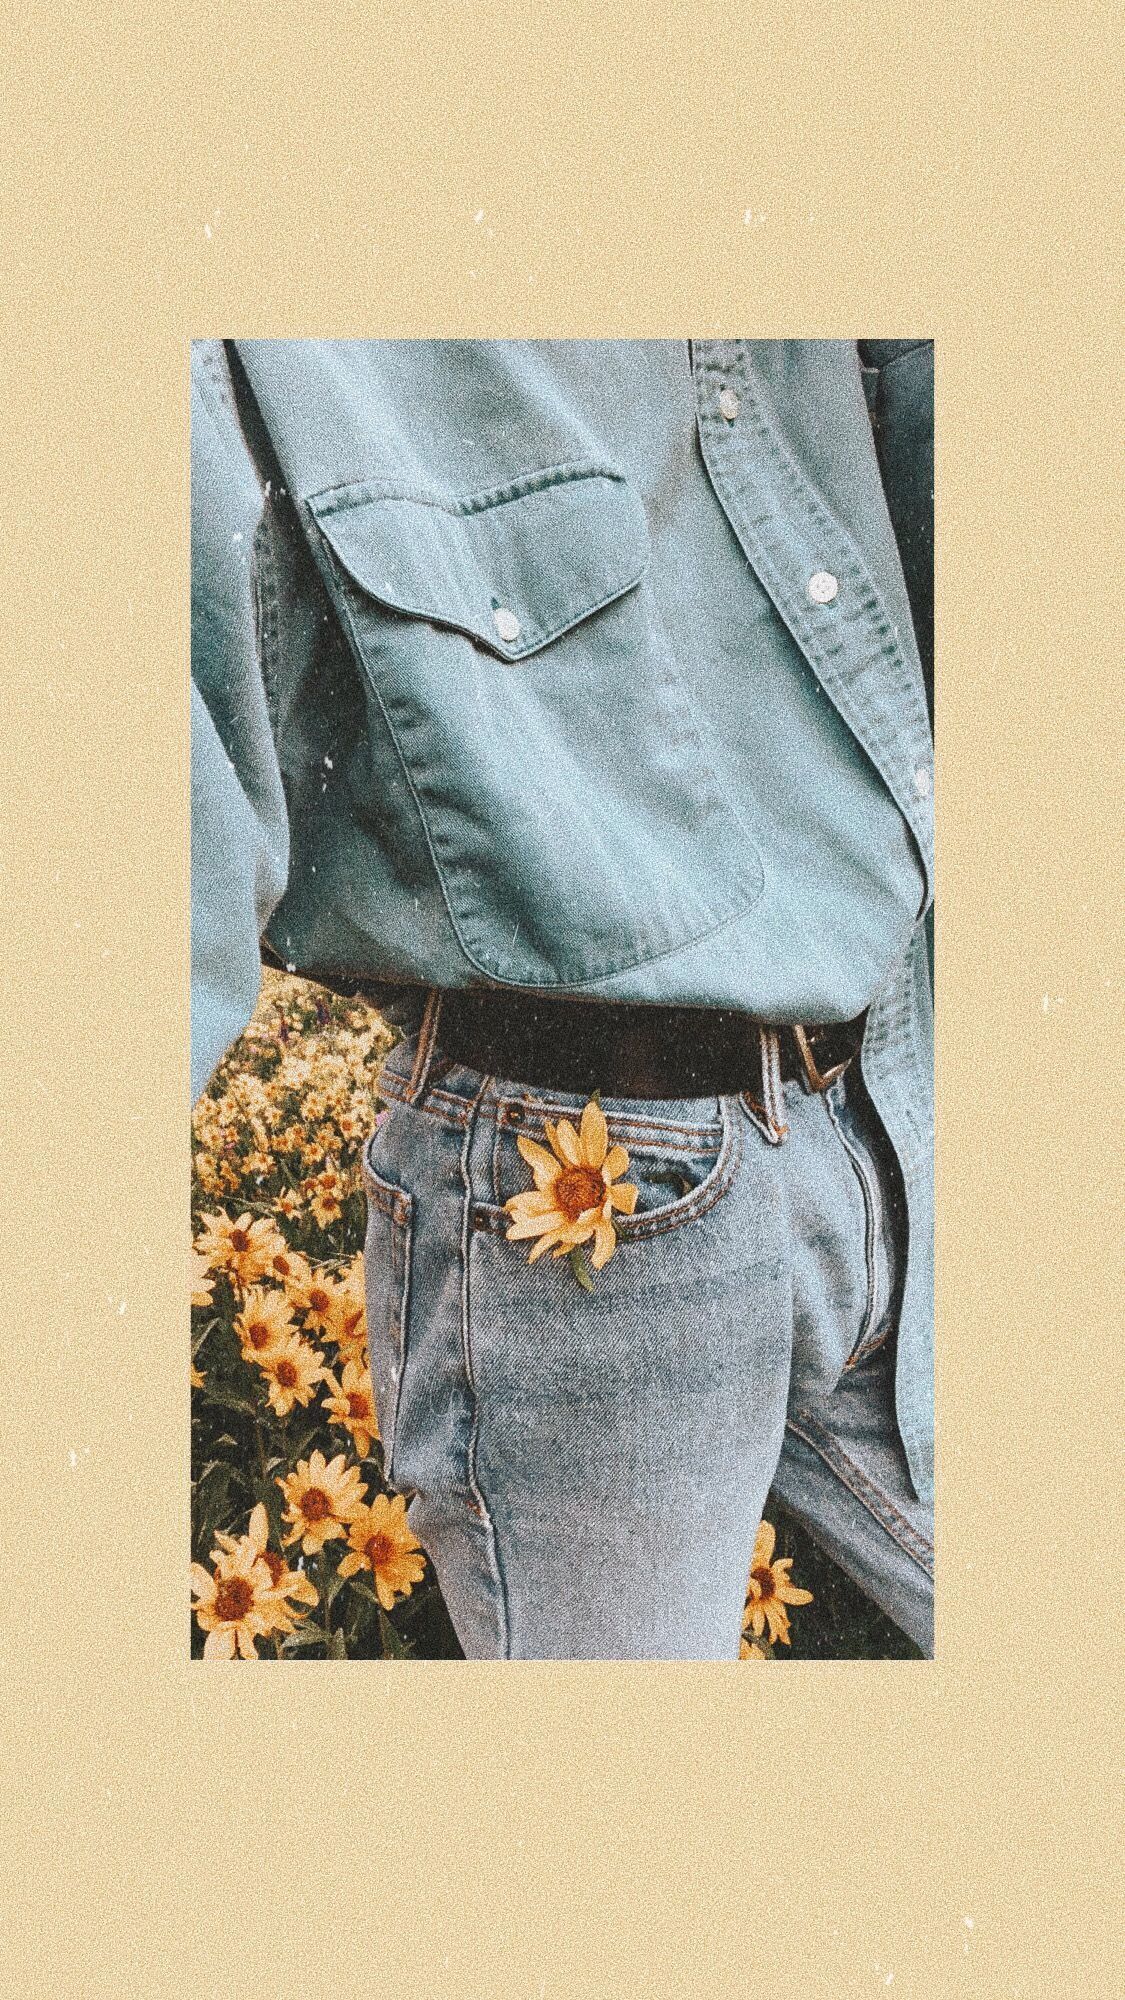 Aesthetic Clothes Wallpaper Free .wallpaperaccess.com